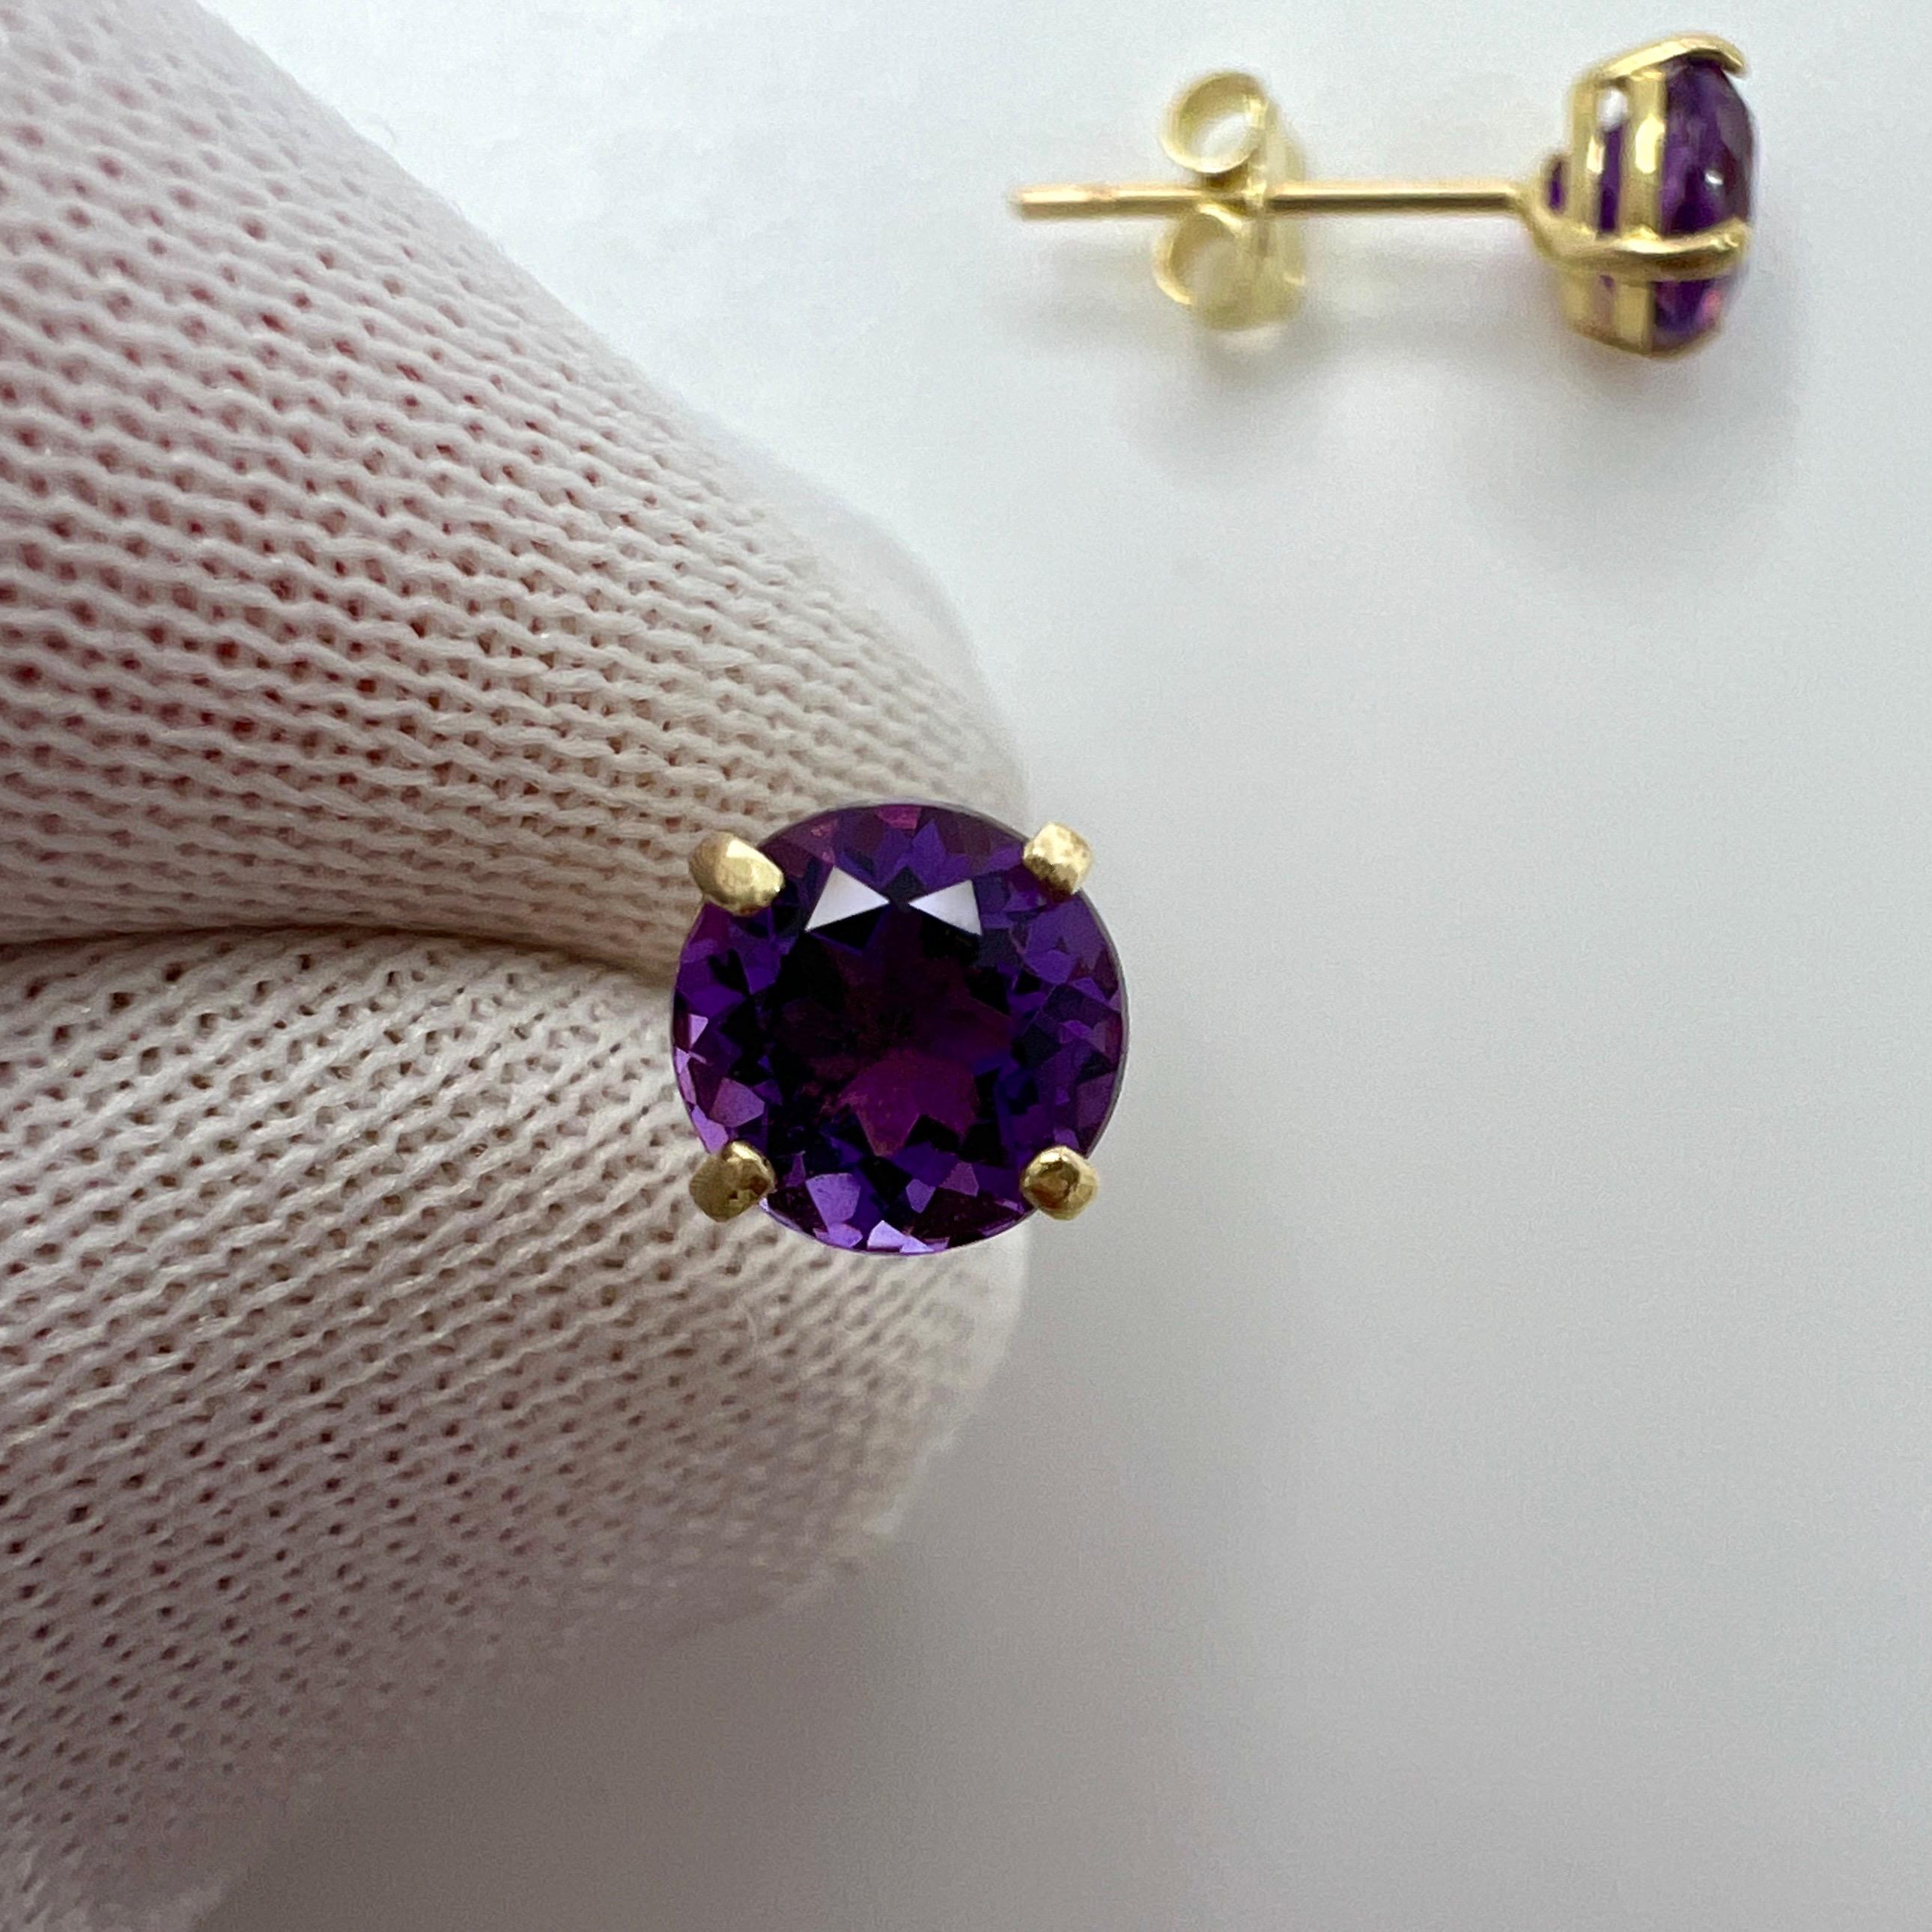 Natural Vivid Deep Purple Amethyst Yellow Gold Round Cut Stud Earrings.

Beautiful 5mm matching pair of round amethysts with a vivid deep purple colour, excellent clarity and an excellent round brilliant cut. 

The gemstones may vary slightly from